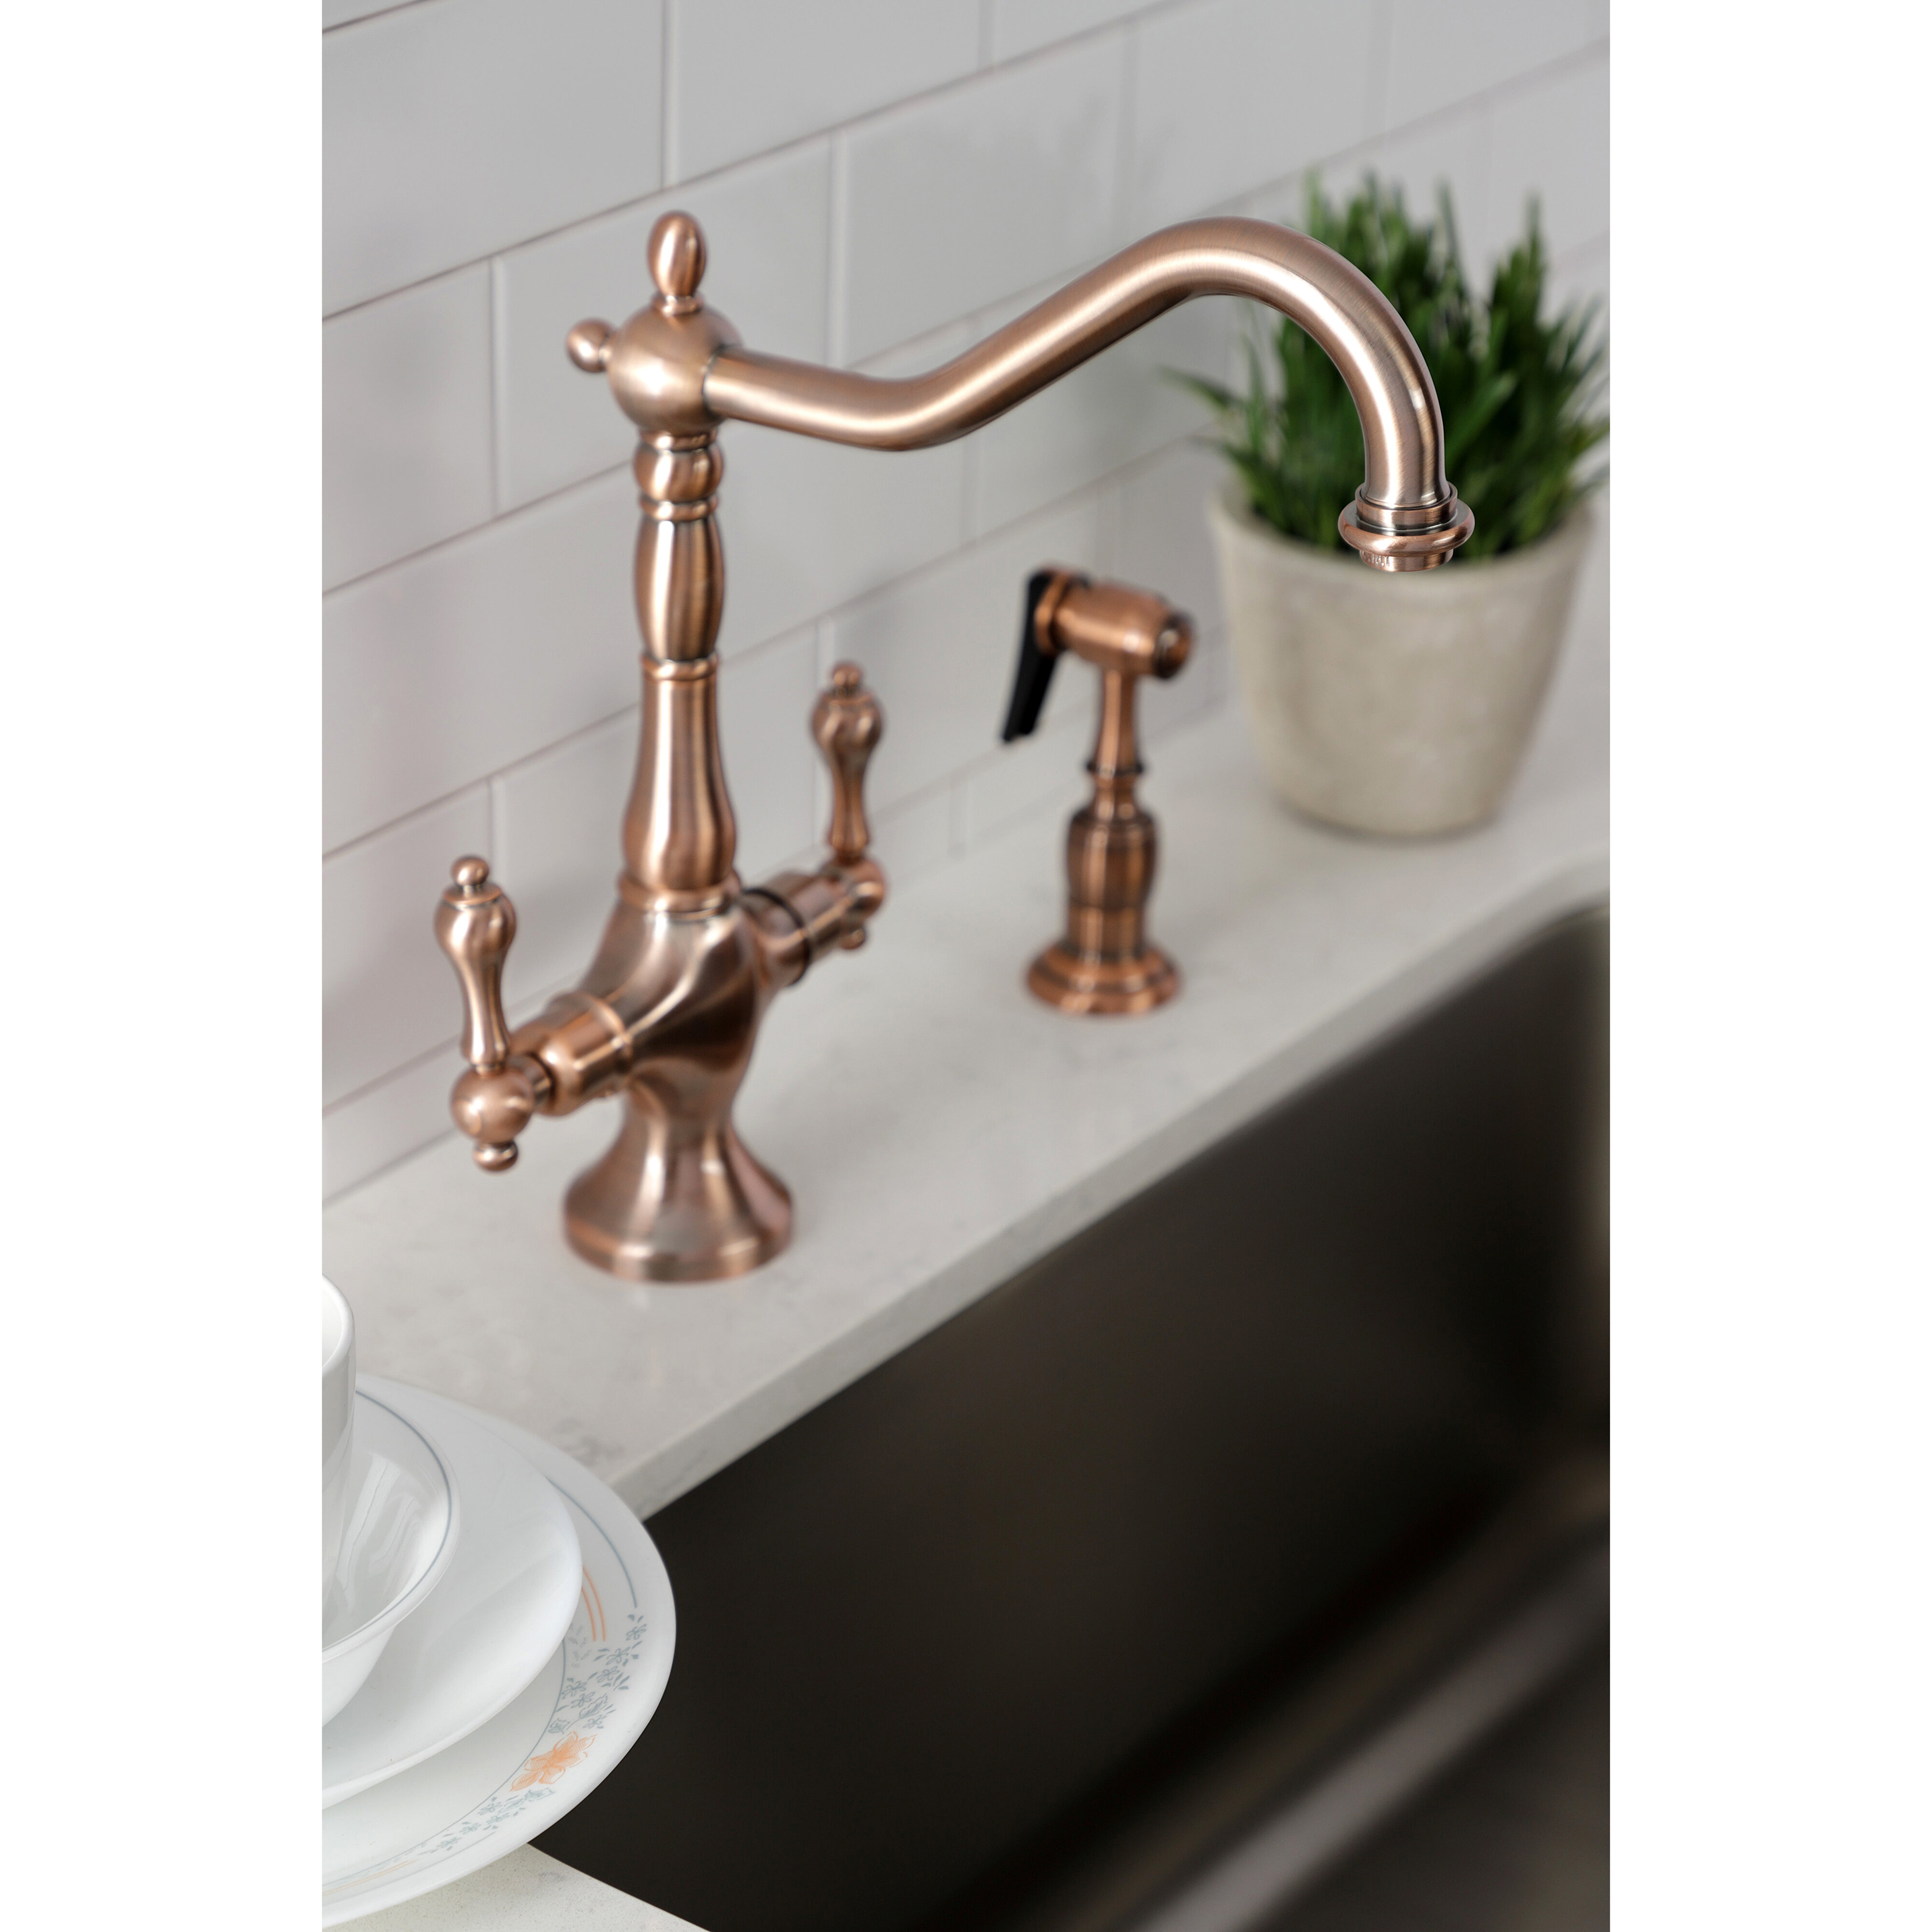 Kingston Brass Heritage Double Handle Kitchen Faucet With Optional Side Spray Reviews Wayfair